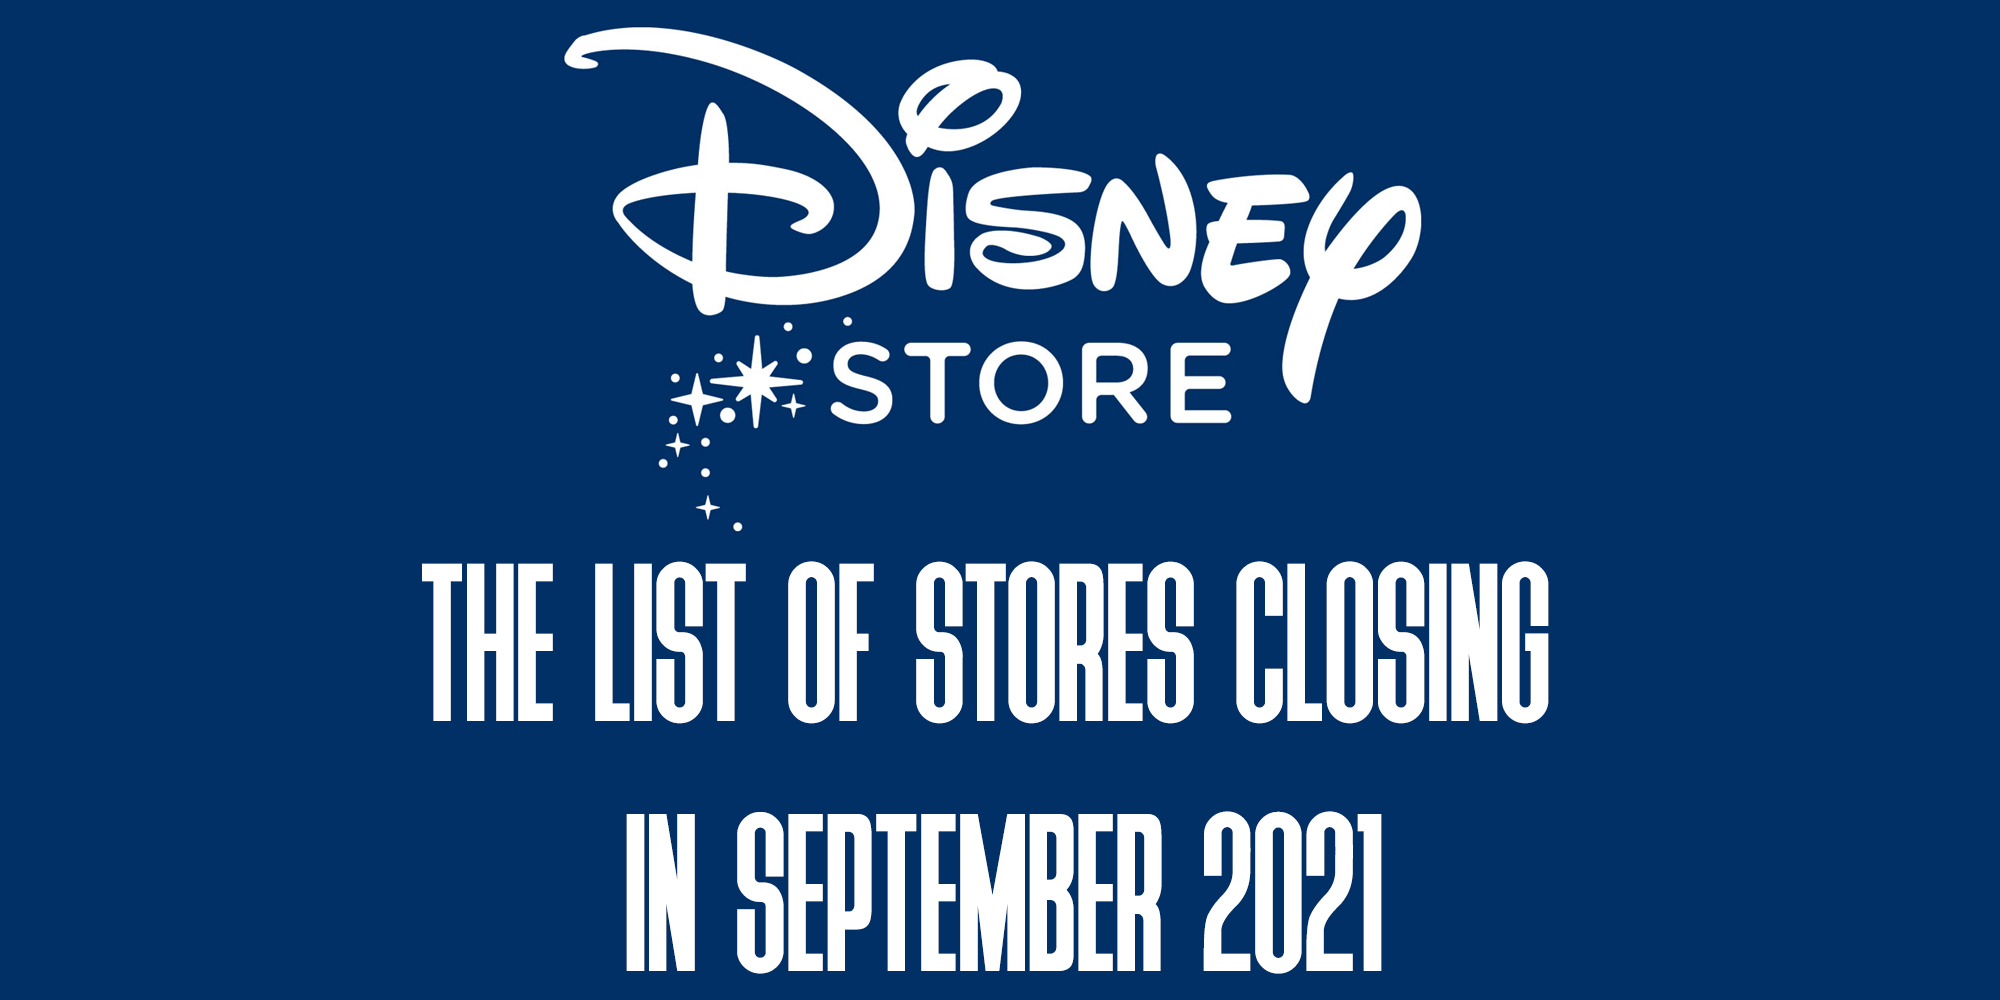 A List Of Disney Stores Closing In September 2021